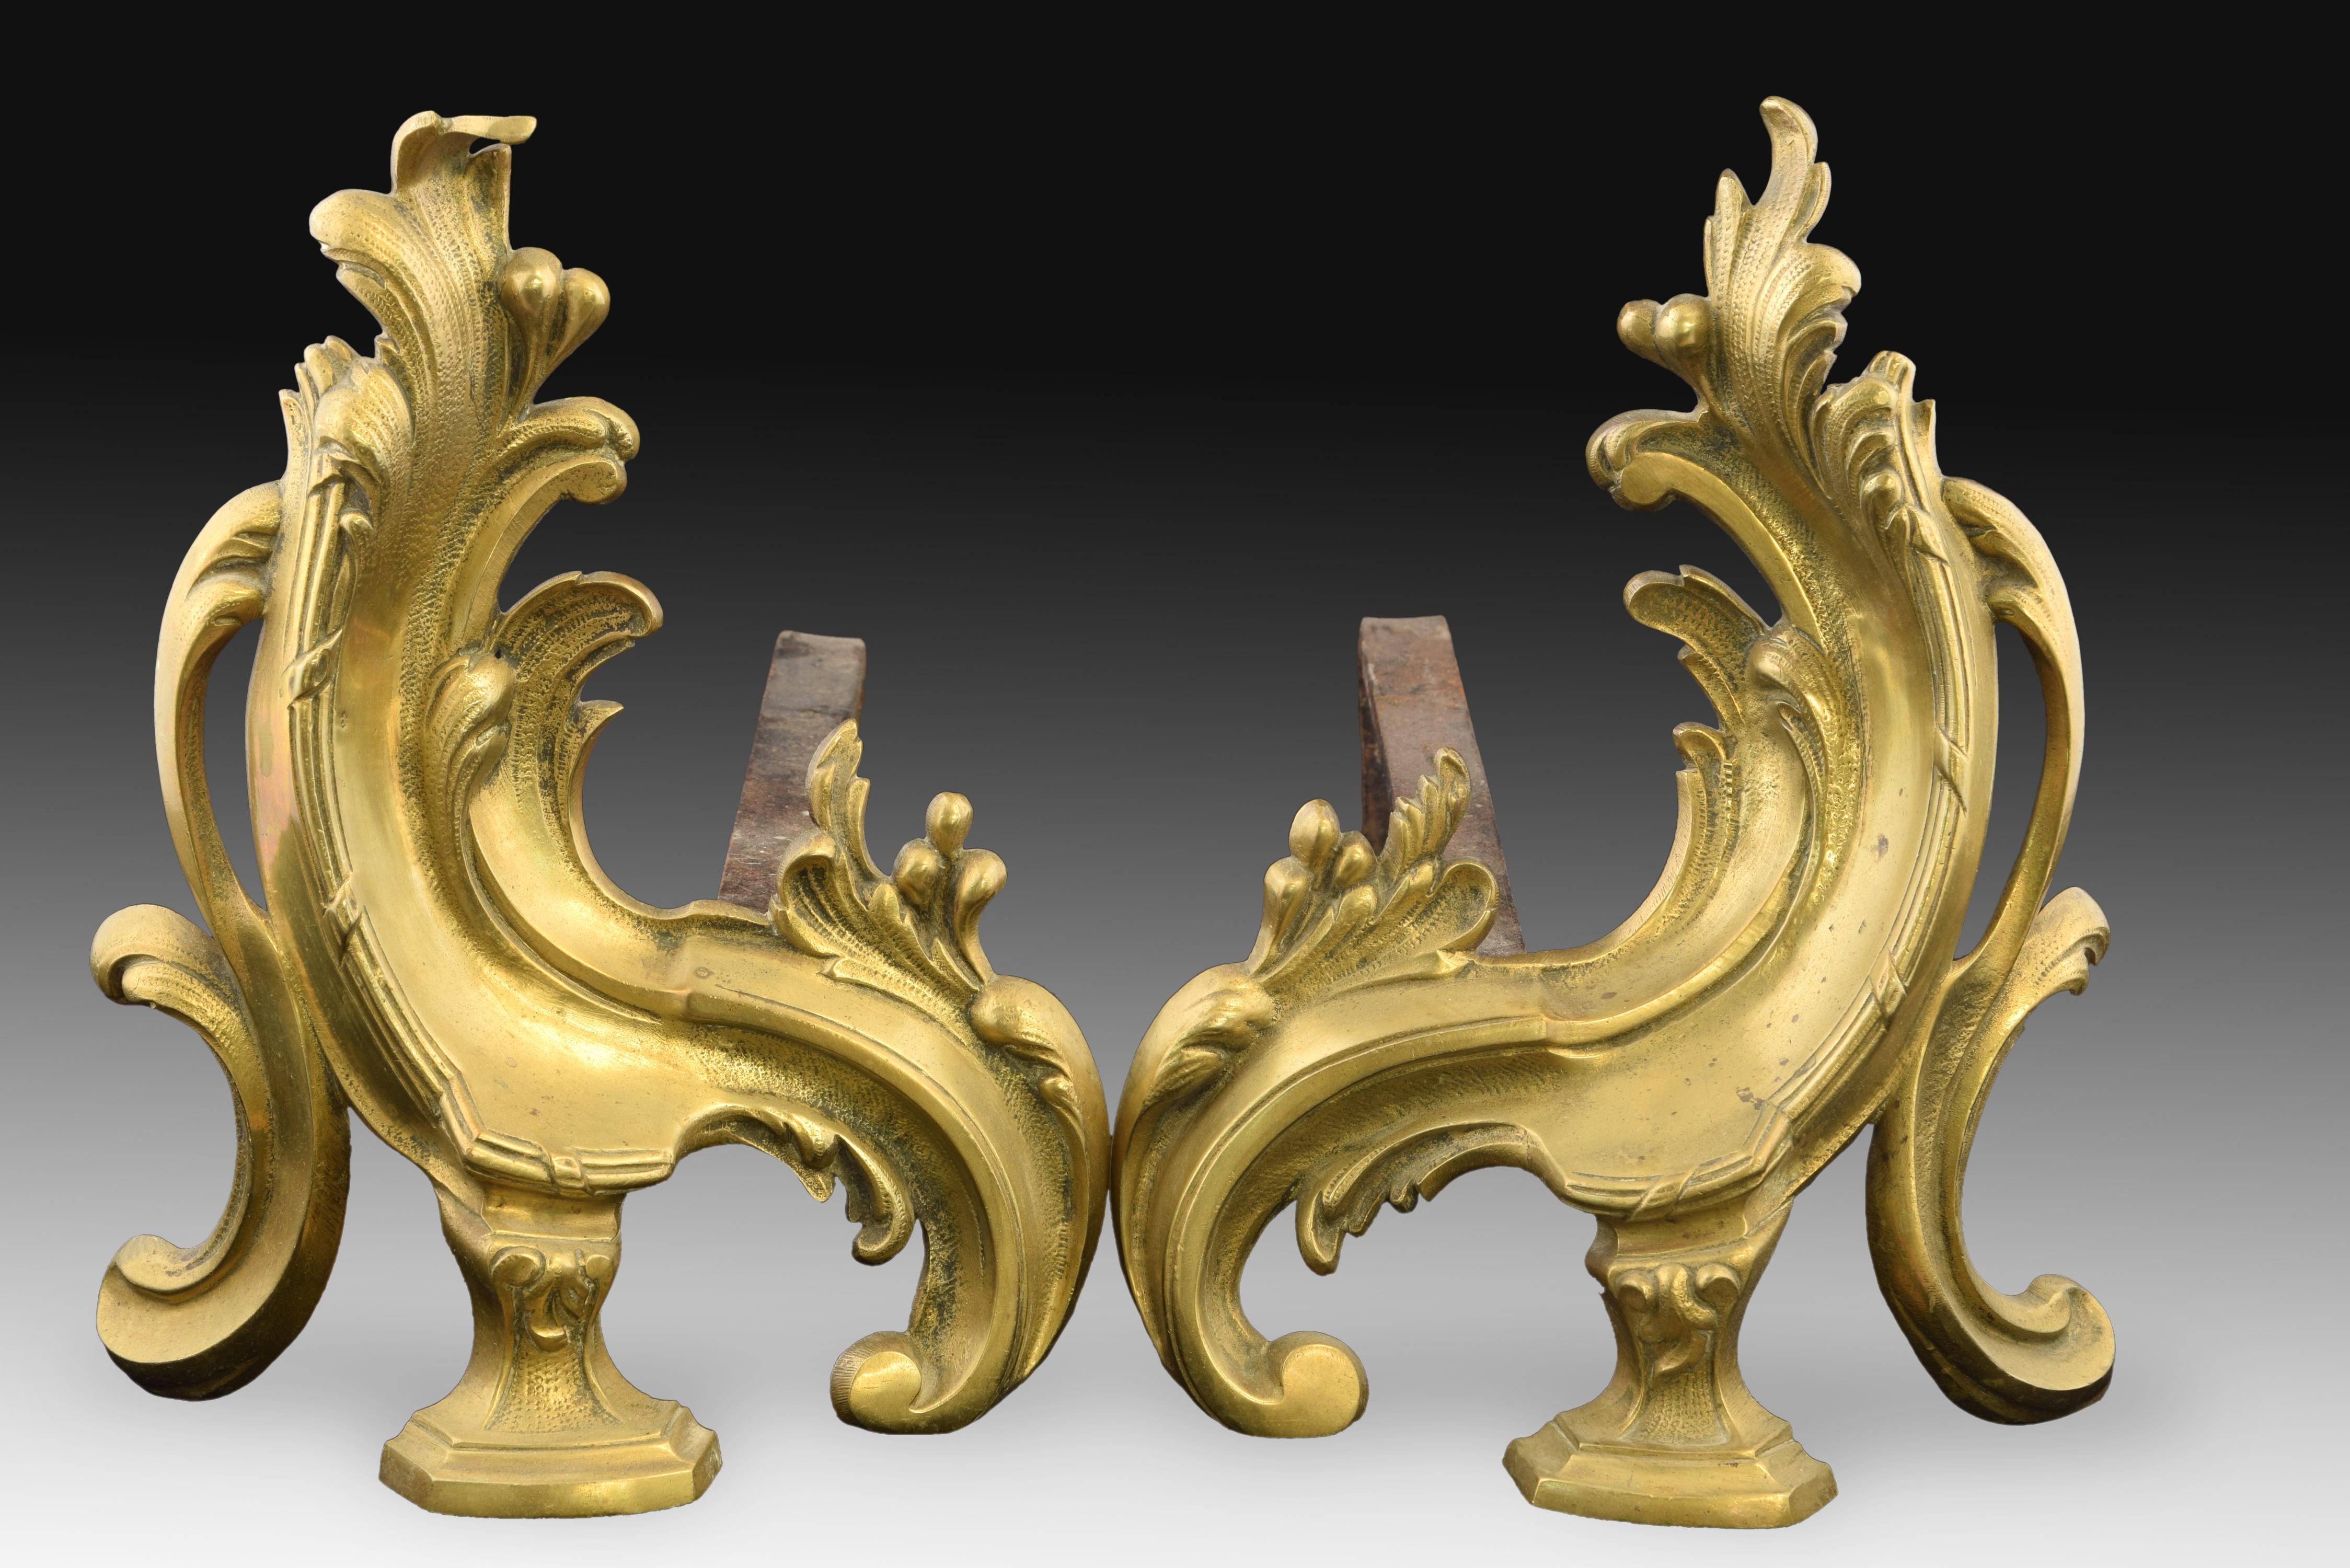 Pair of morillos. Bronze, iron France, 19th century pair of chimney pots decorated with architectural and vegetal elements that have French Louis XV or Rococo style influence both in their curved lines and in the asymmetrical composition that each